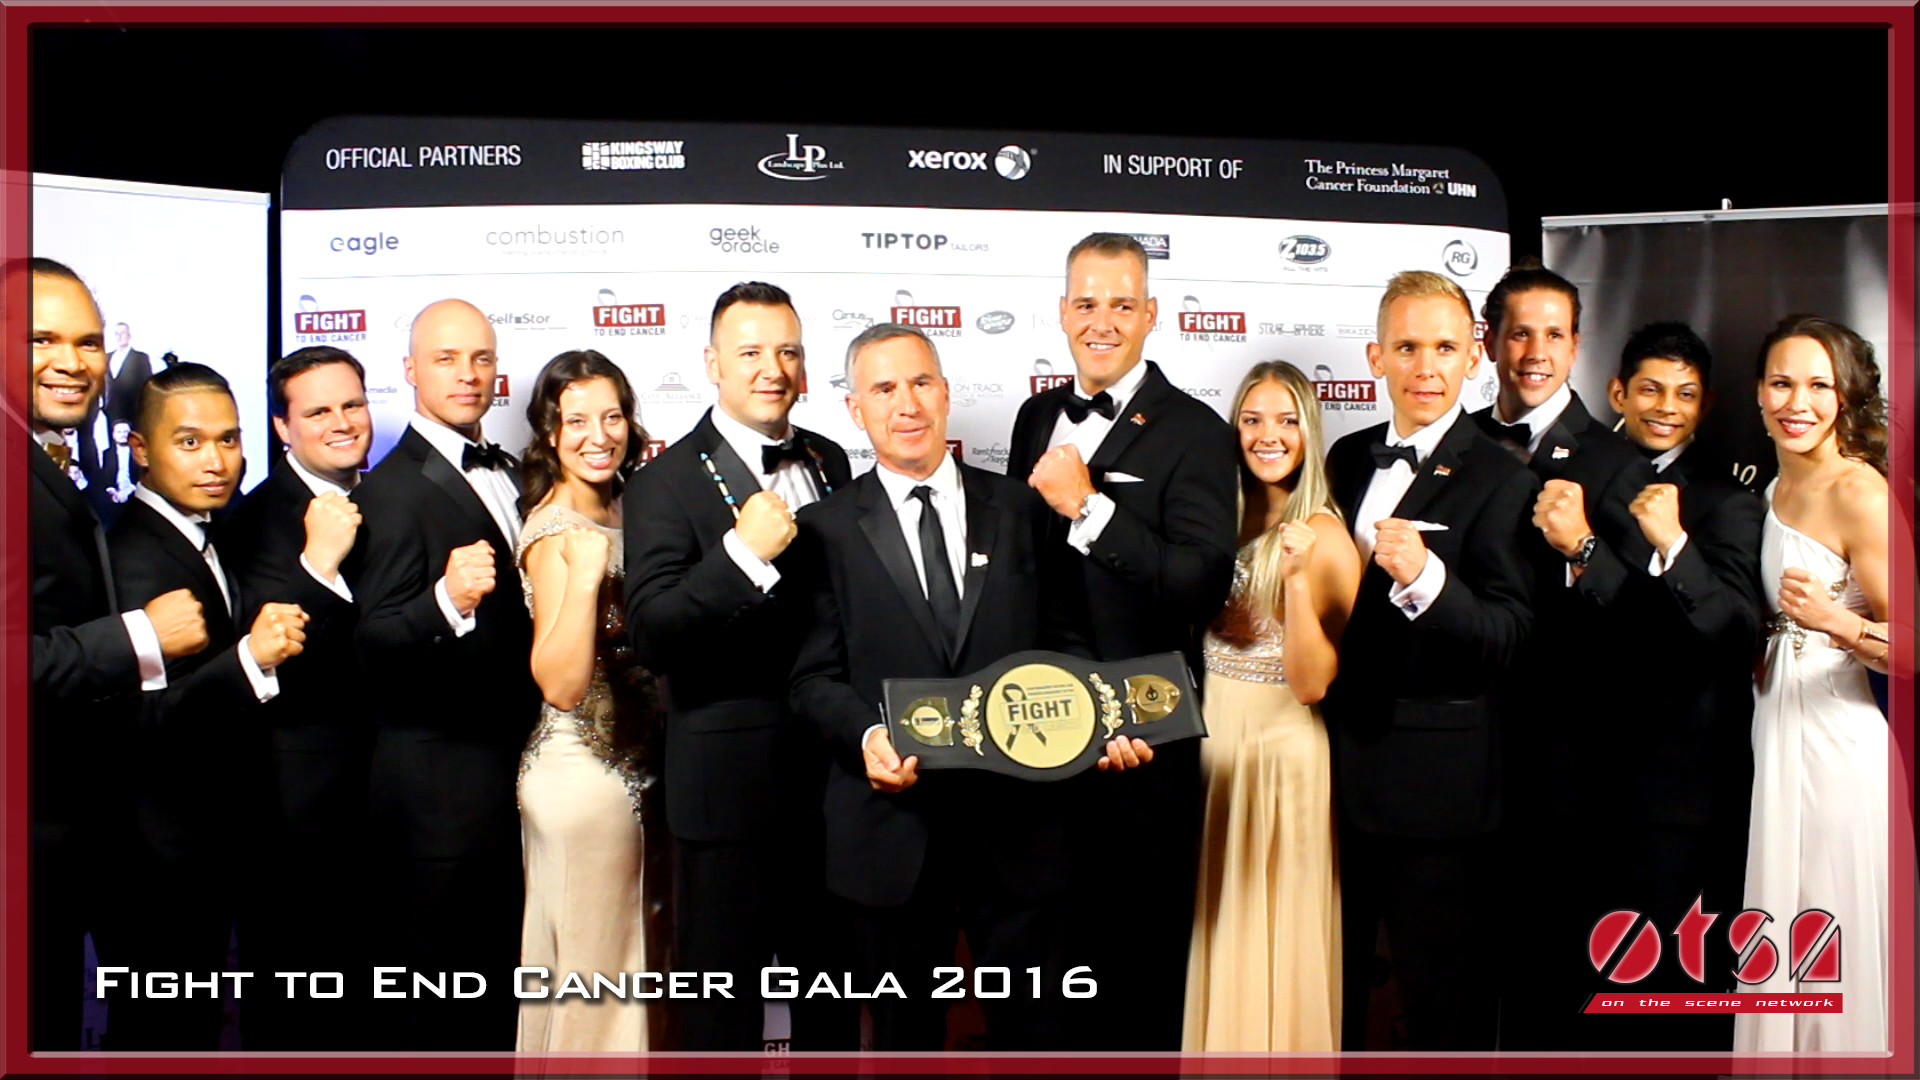 Fight to End Cancer Gala 2016